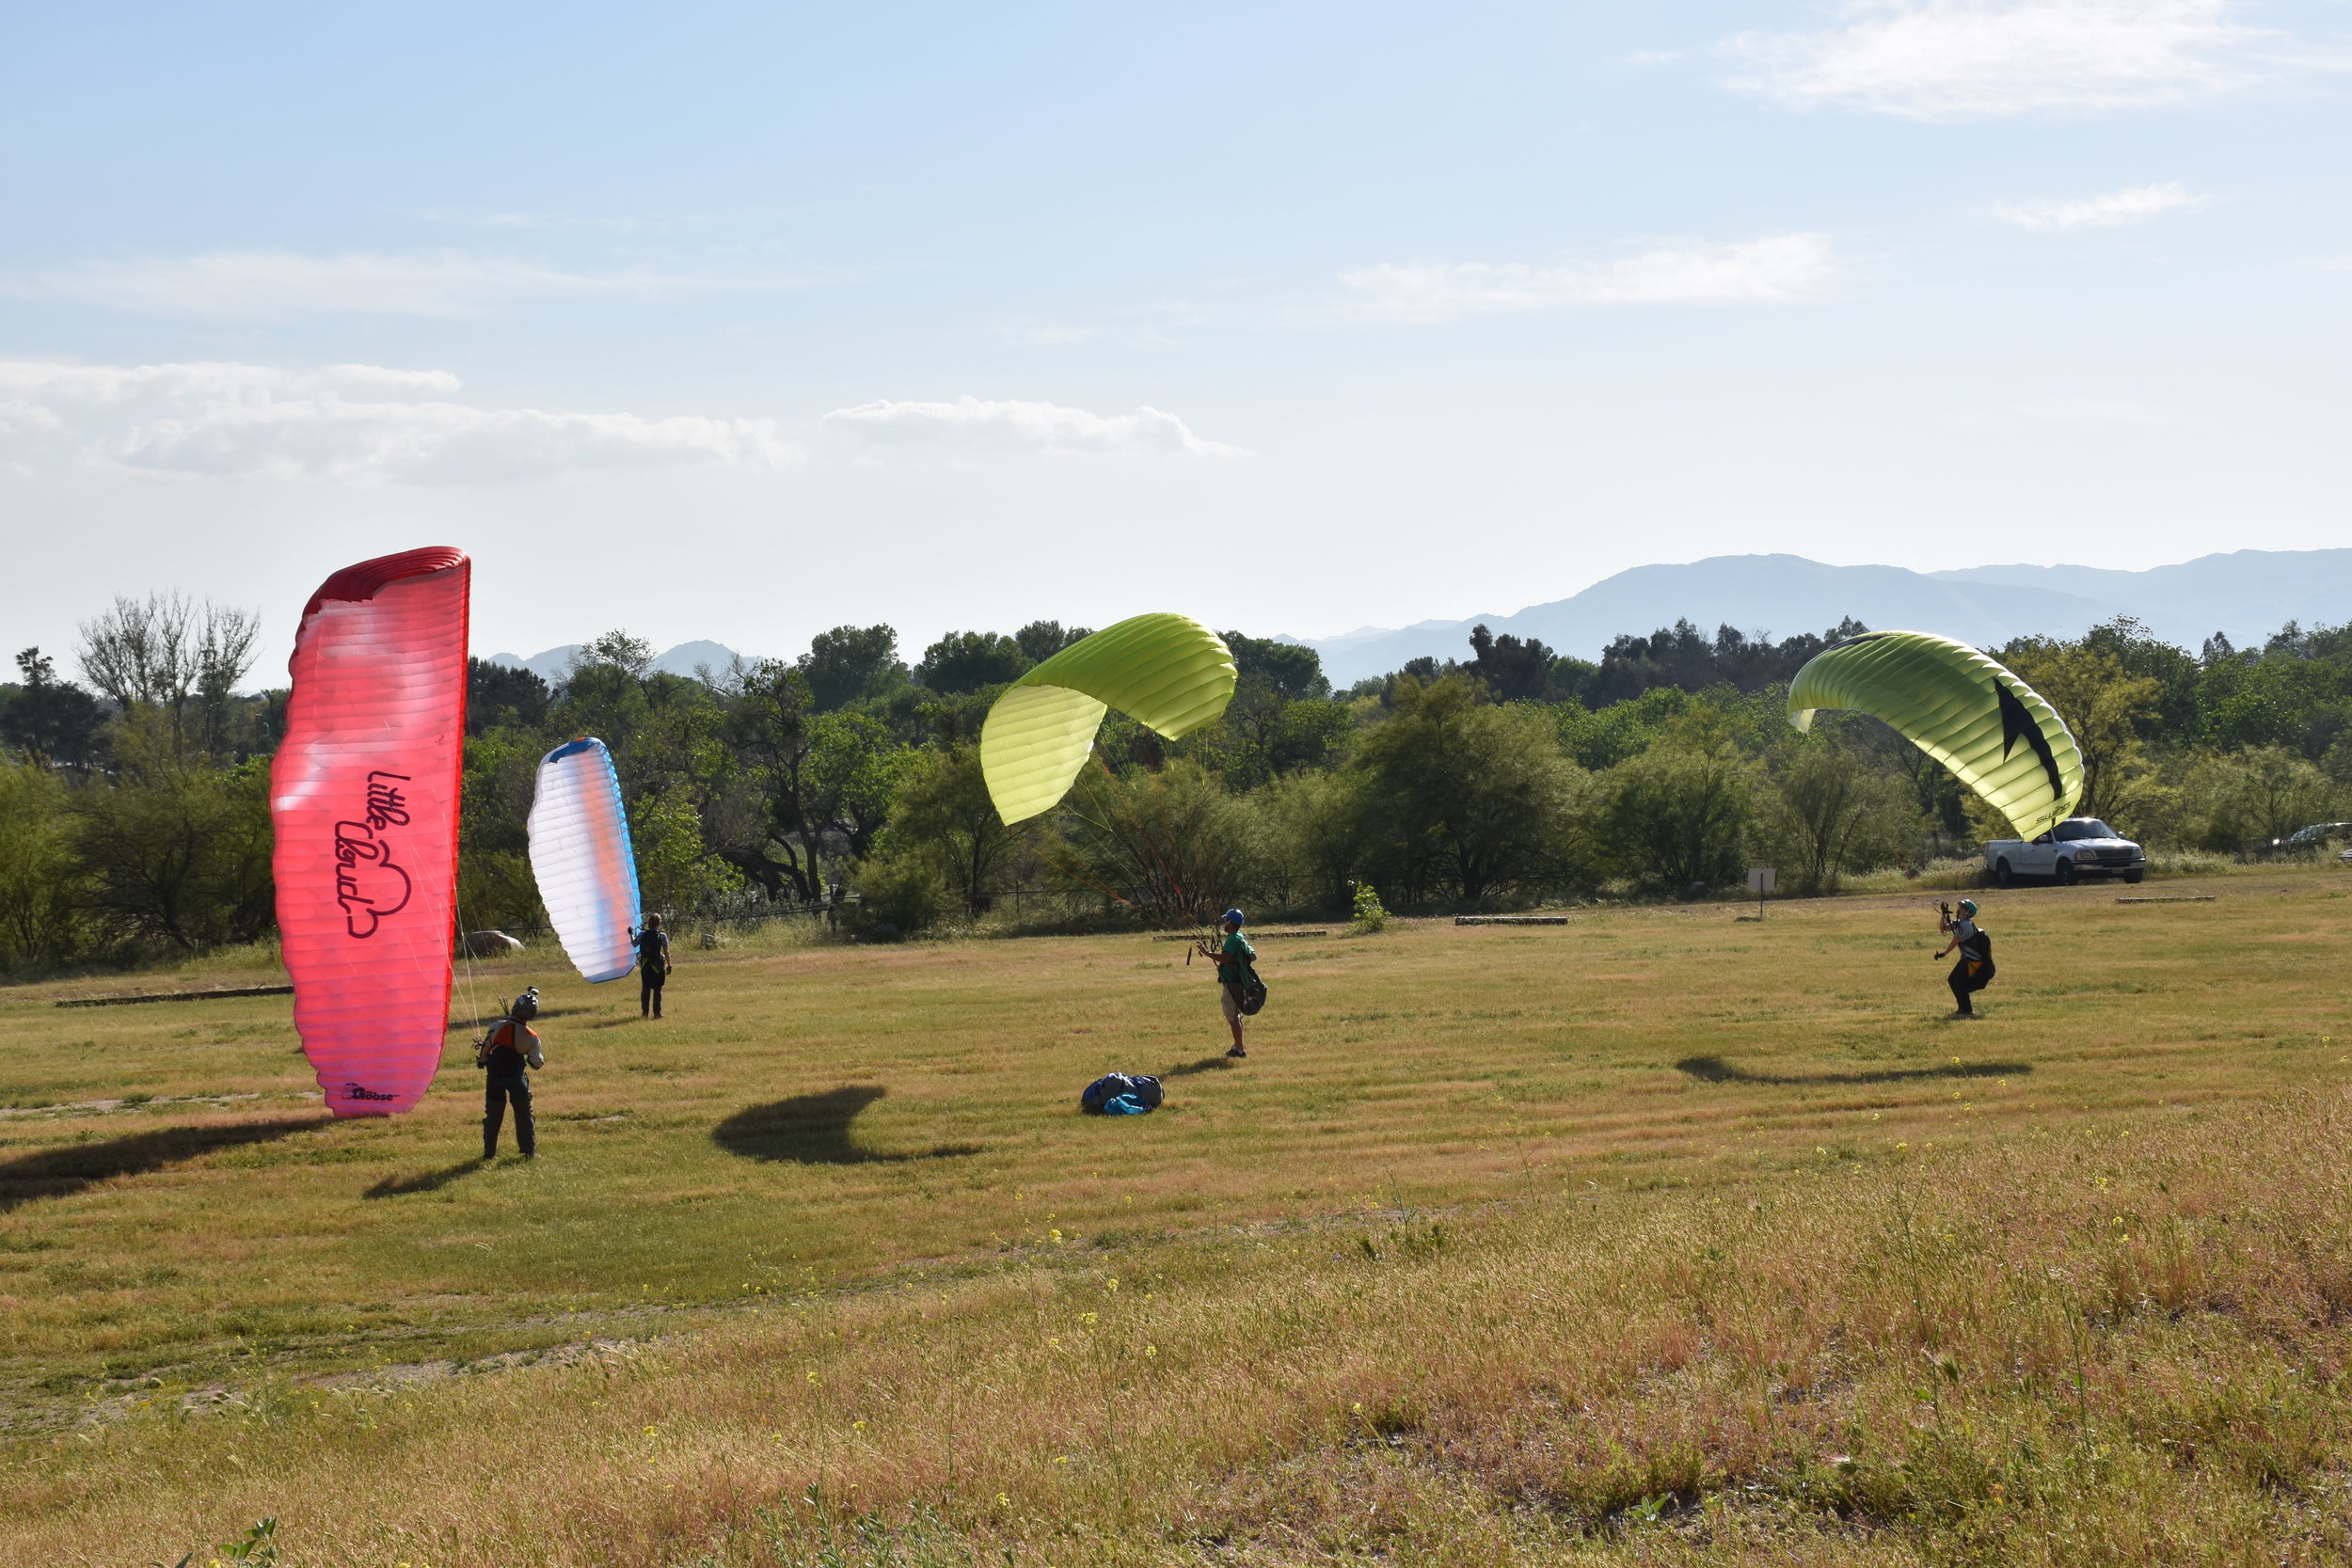 four paragliders in a field, Soboba Flight Park, learn paragliding and paramotoring at our camp